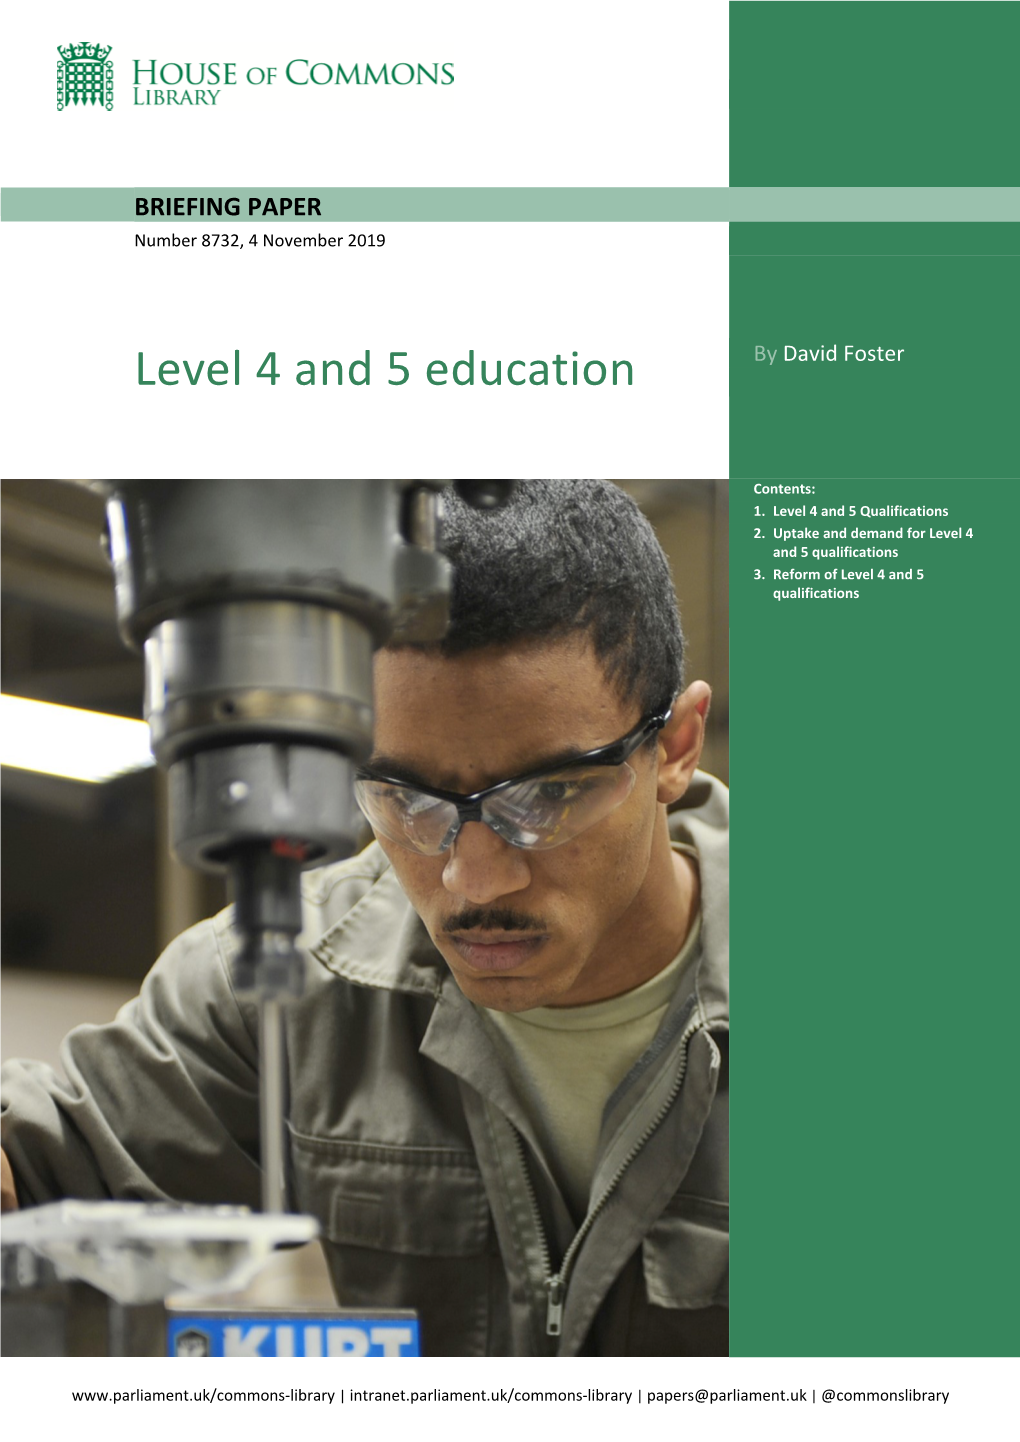 Level 4 and 5 Education